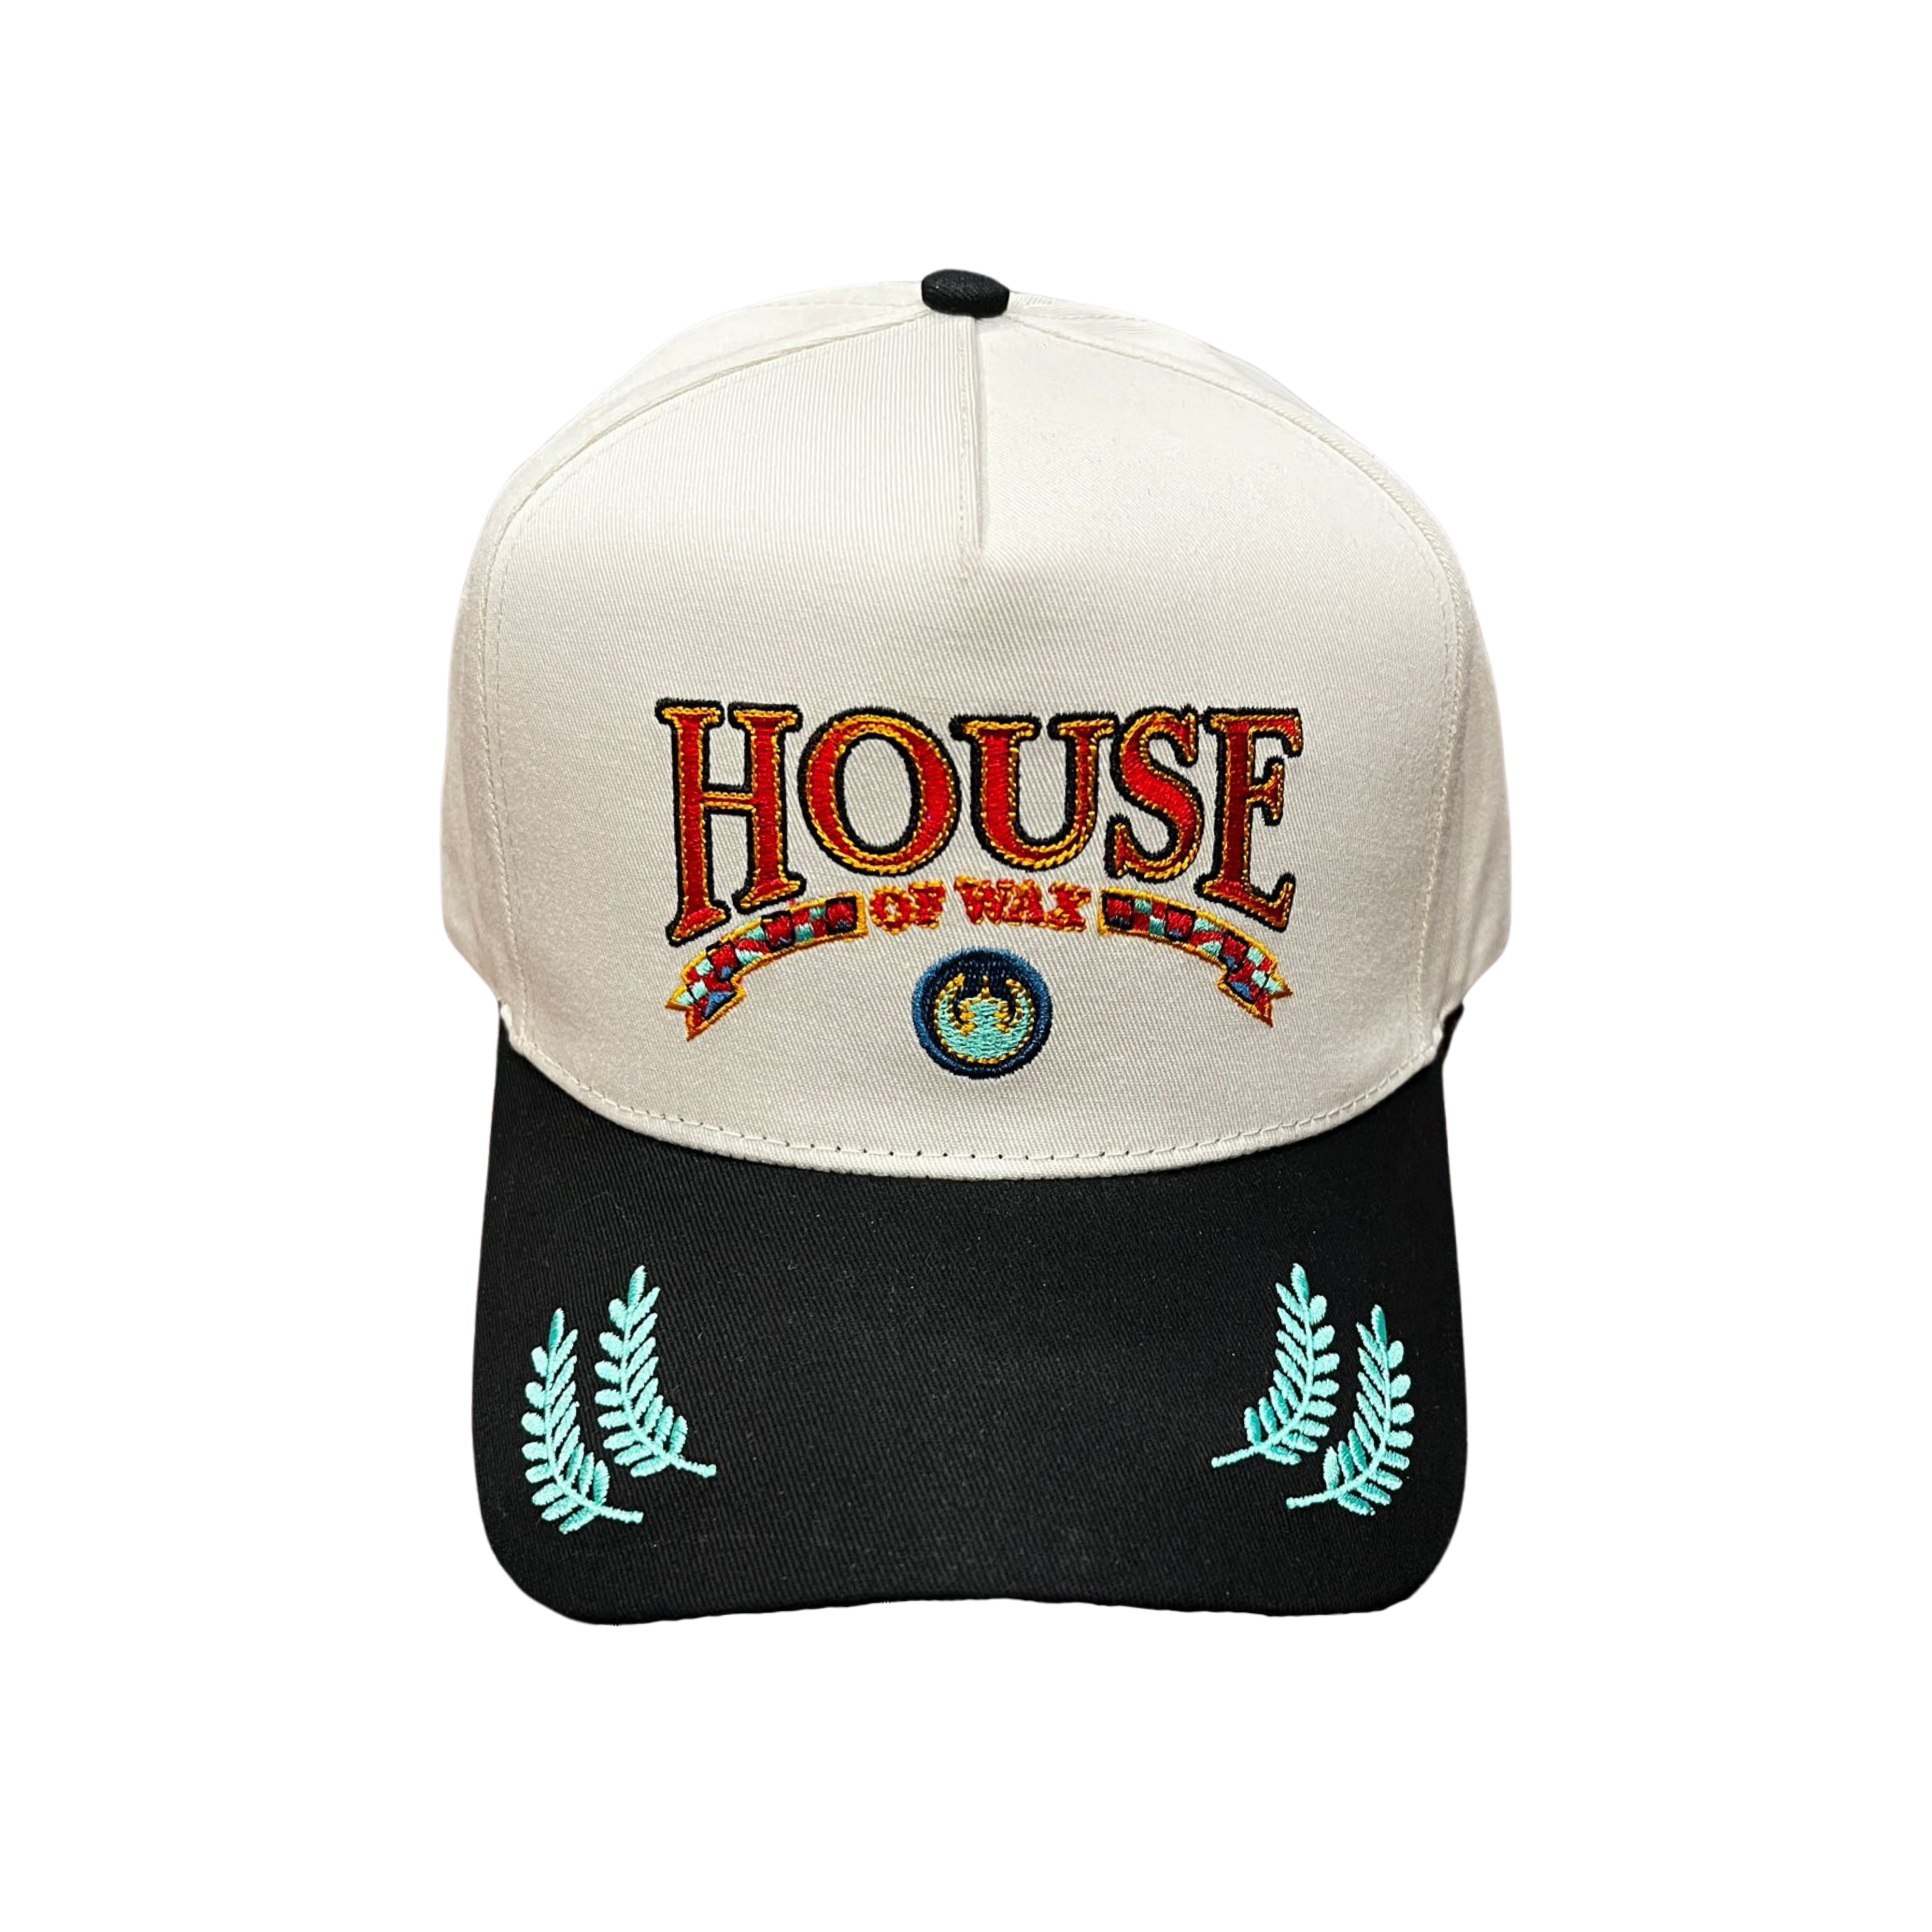 HOUSE OF WAX HAT